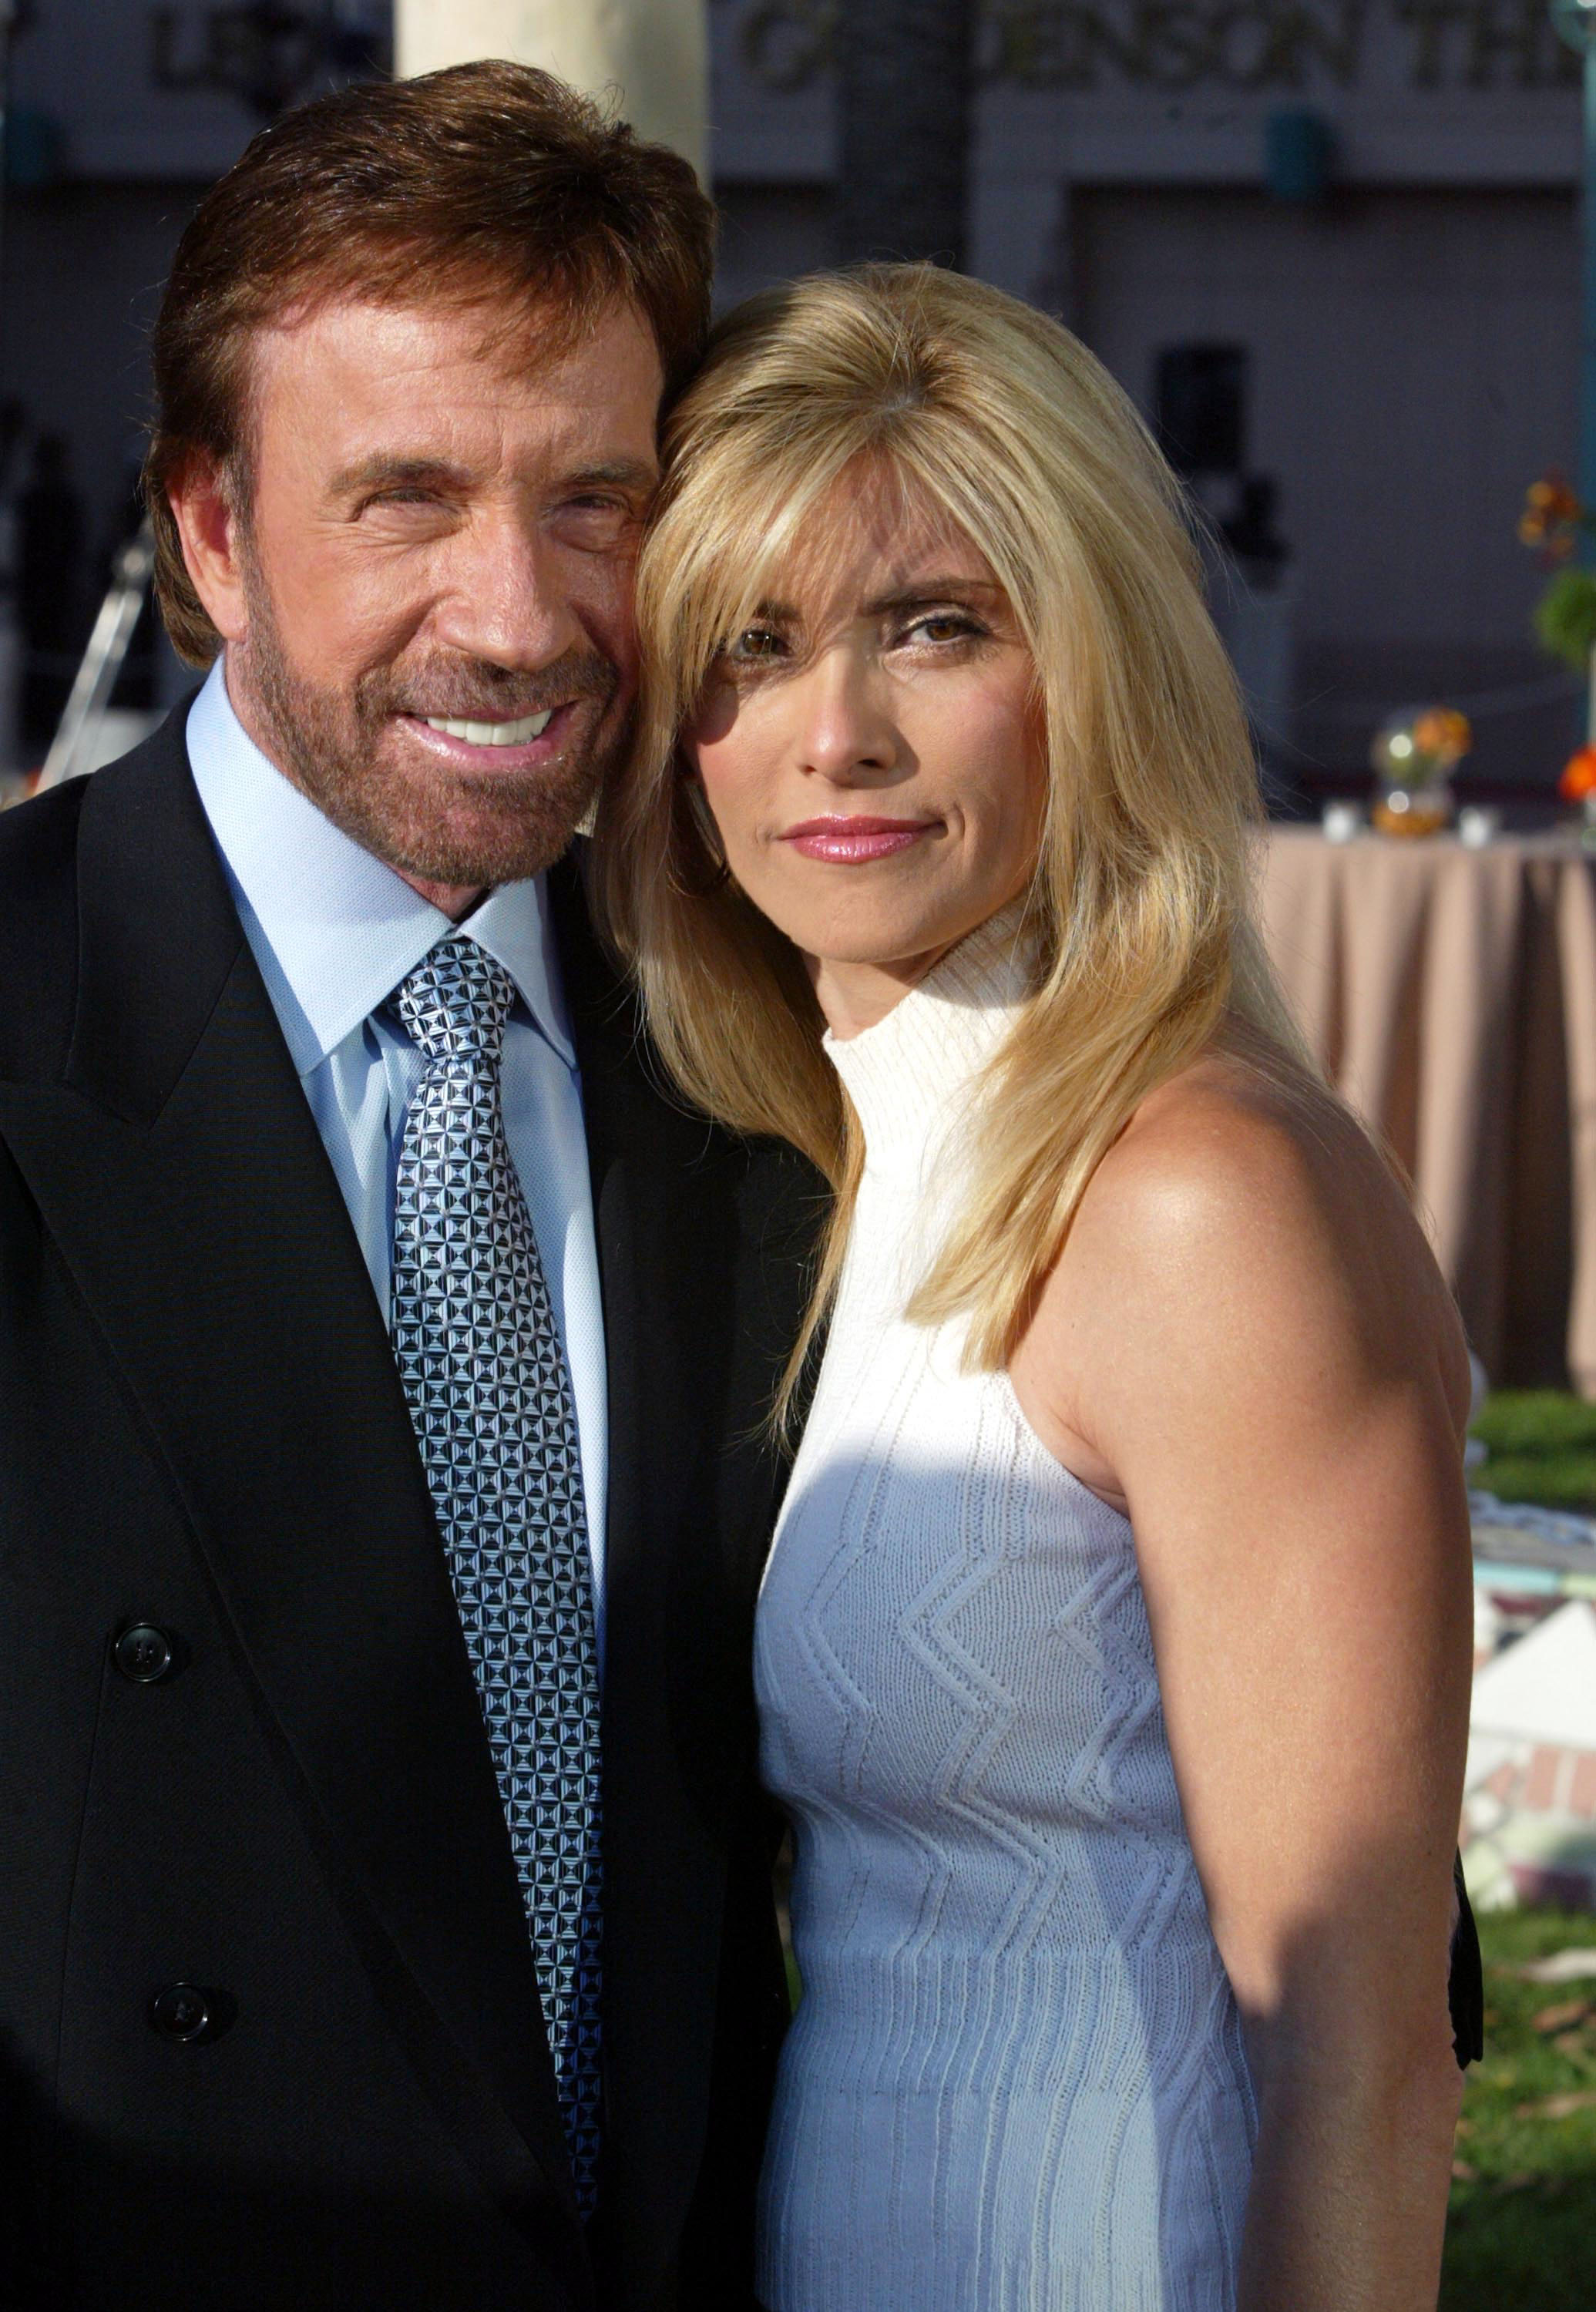 Chuck Norris and Gena O'Kelley arrive at the Academy of Television Arts and Sciences Hall of Fame Induction Ceremony in North Hollywood, California, on June 26, 2004. | Source: Getty Images